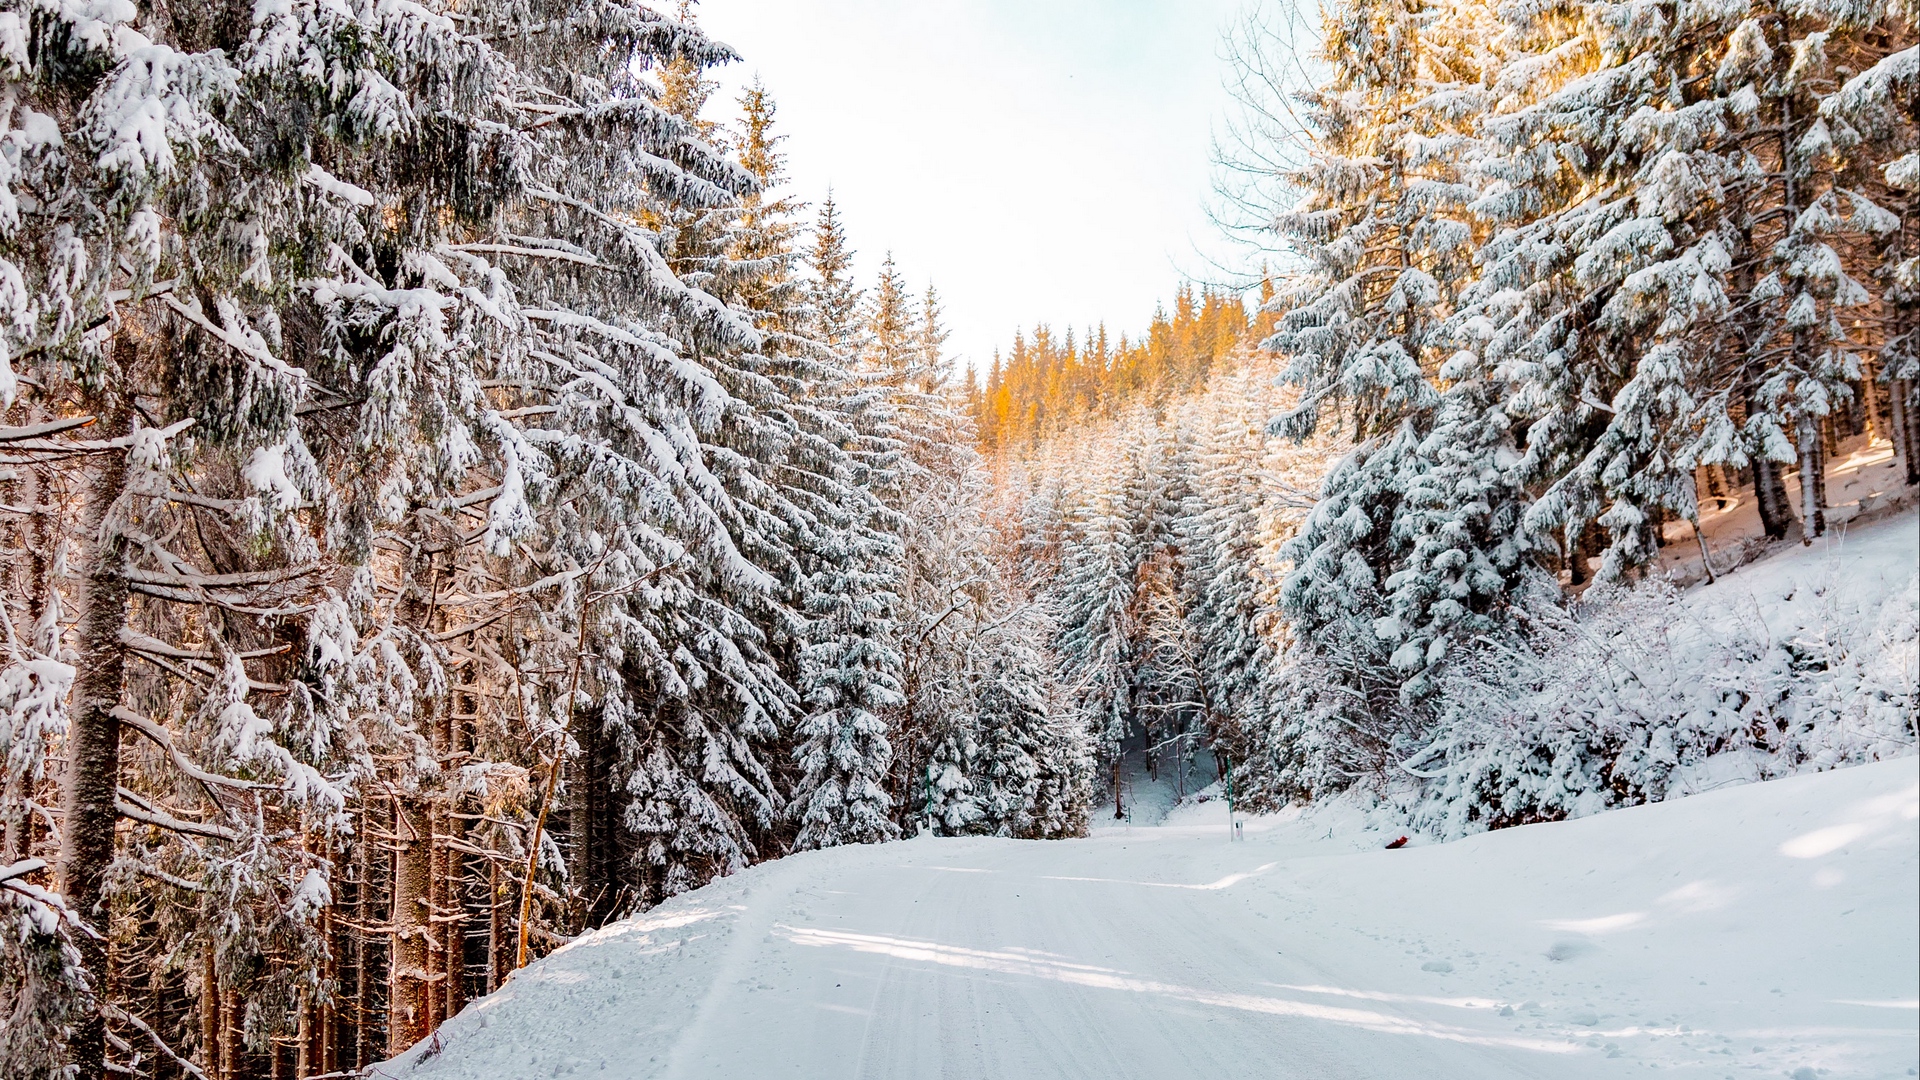 Download wallpaper 1920x1080 forest, winter, snow, road, sky